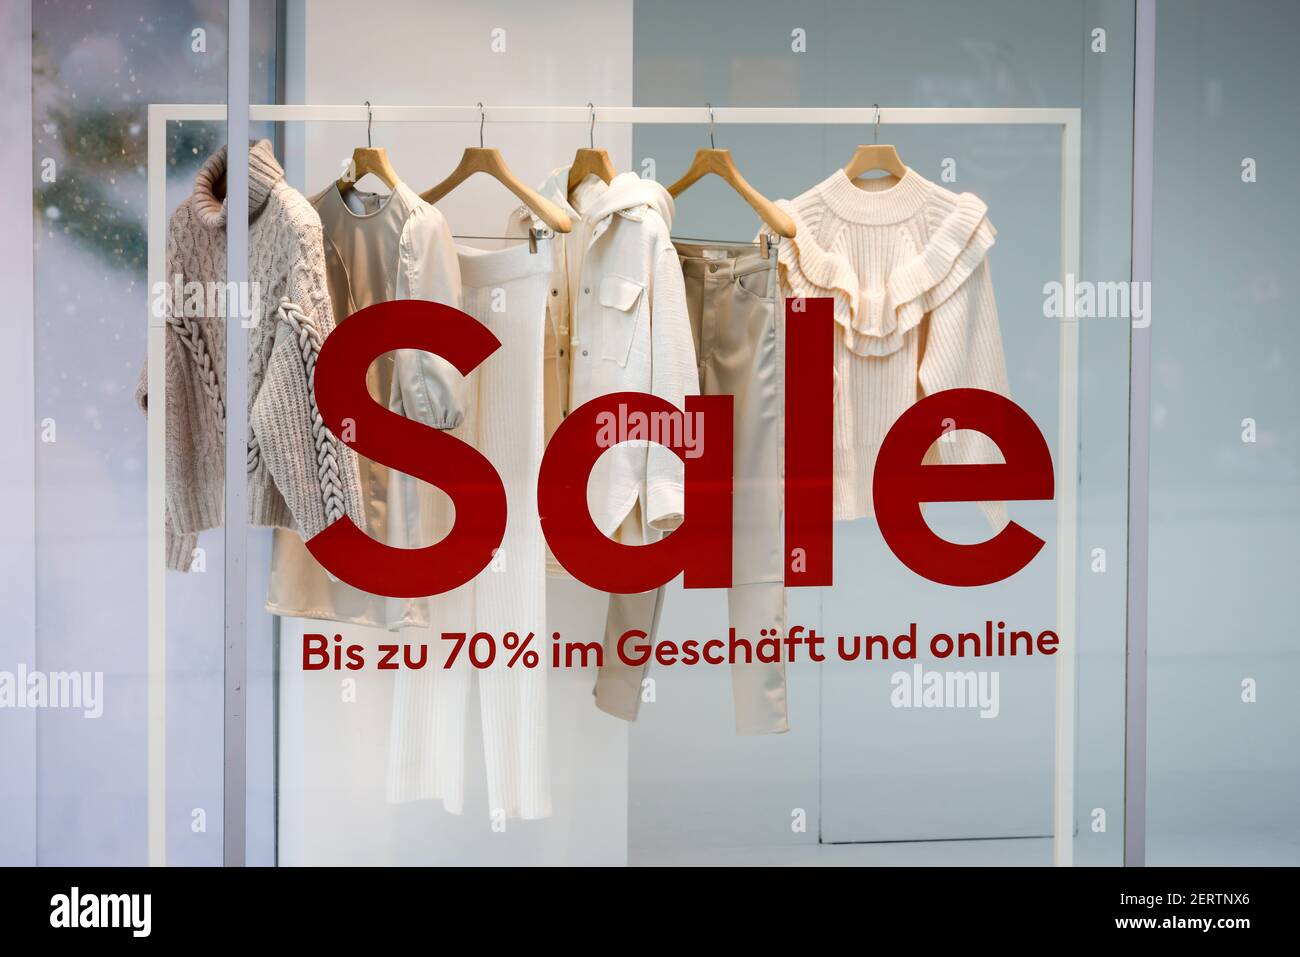 Krefeld, North Rhine-Westphalia, Germany - Krefeld city center in times of corona crisis during the second lockdown, most stores are closed, special o Stock Photo